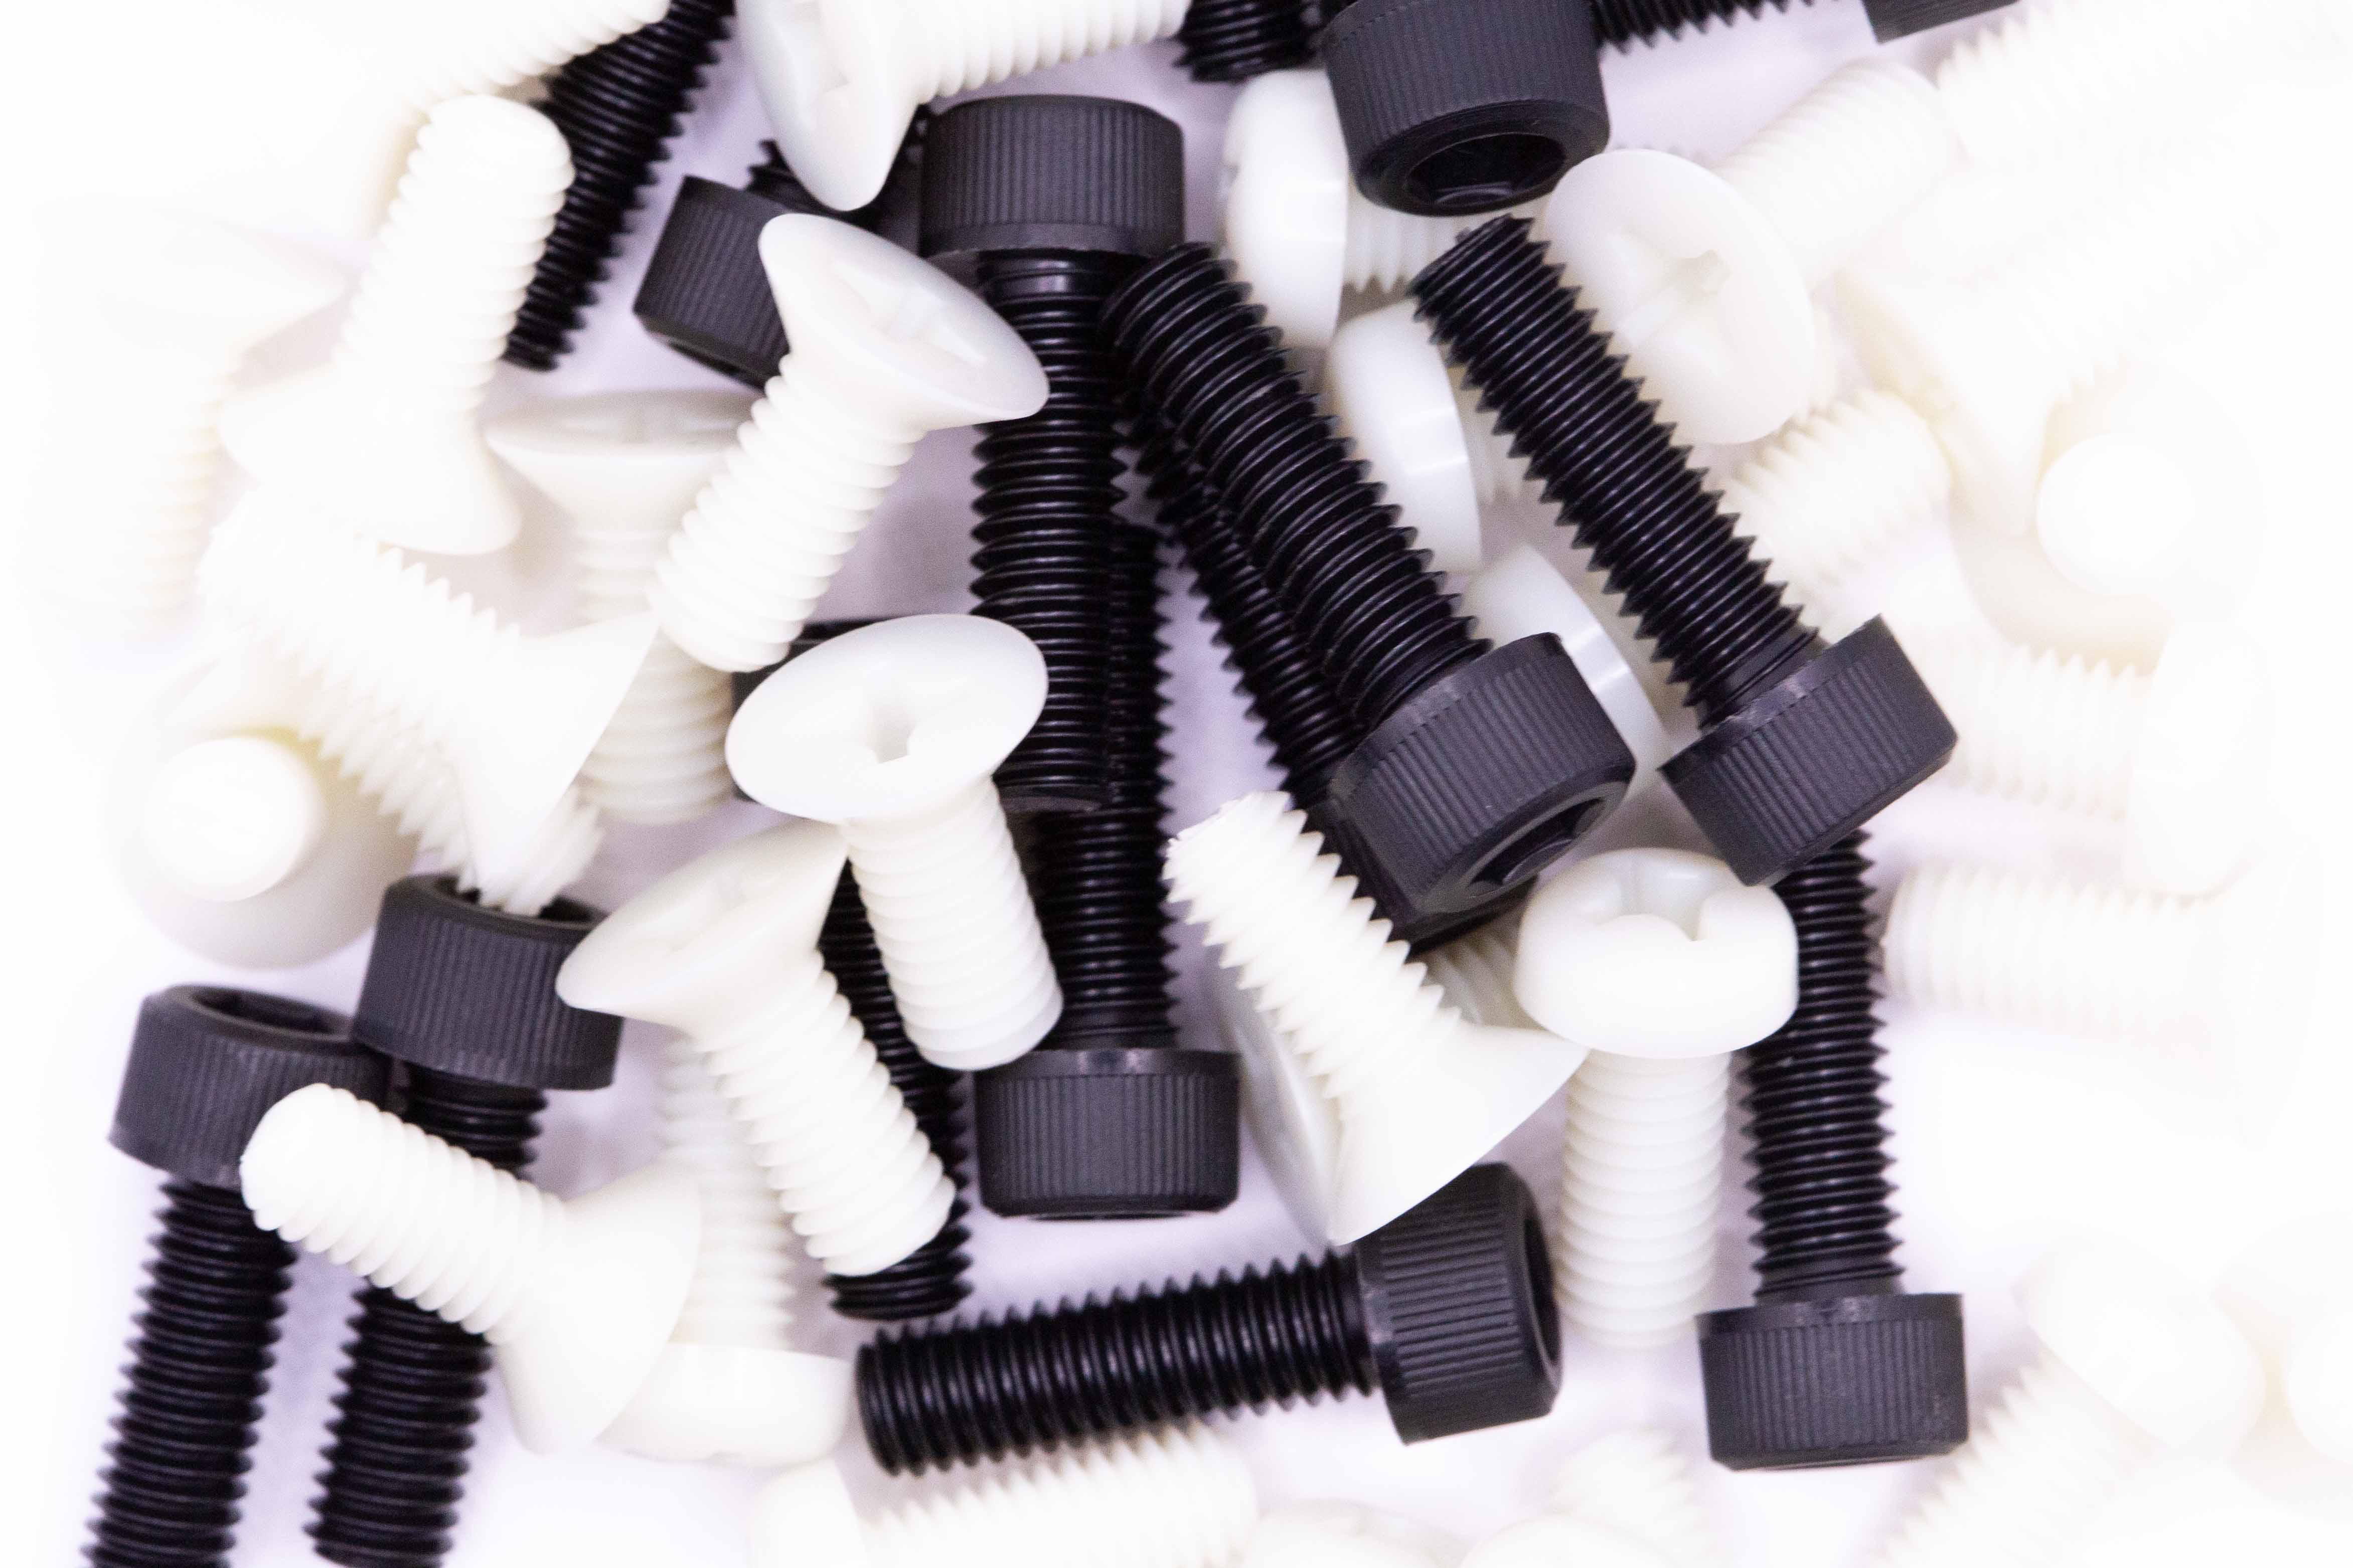 Explore High Performance Plastic-Polymer M1.4 Screws, Bolts, Nuts, Washers  USA 4 products - Buy High Performance Plastic-Polymer M1.4 Screws, Bolts,  Nuts, Washers USA in United Kingdom. Check Price and Buy Online. ✓